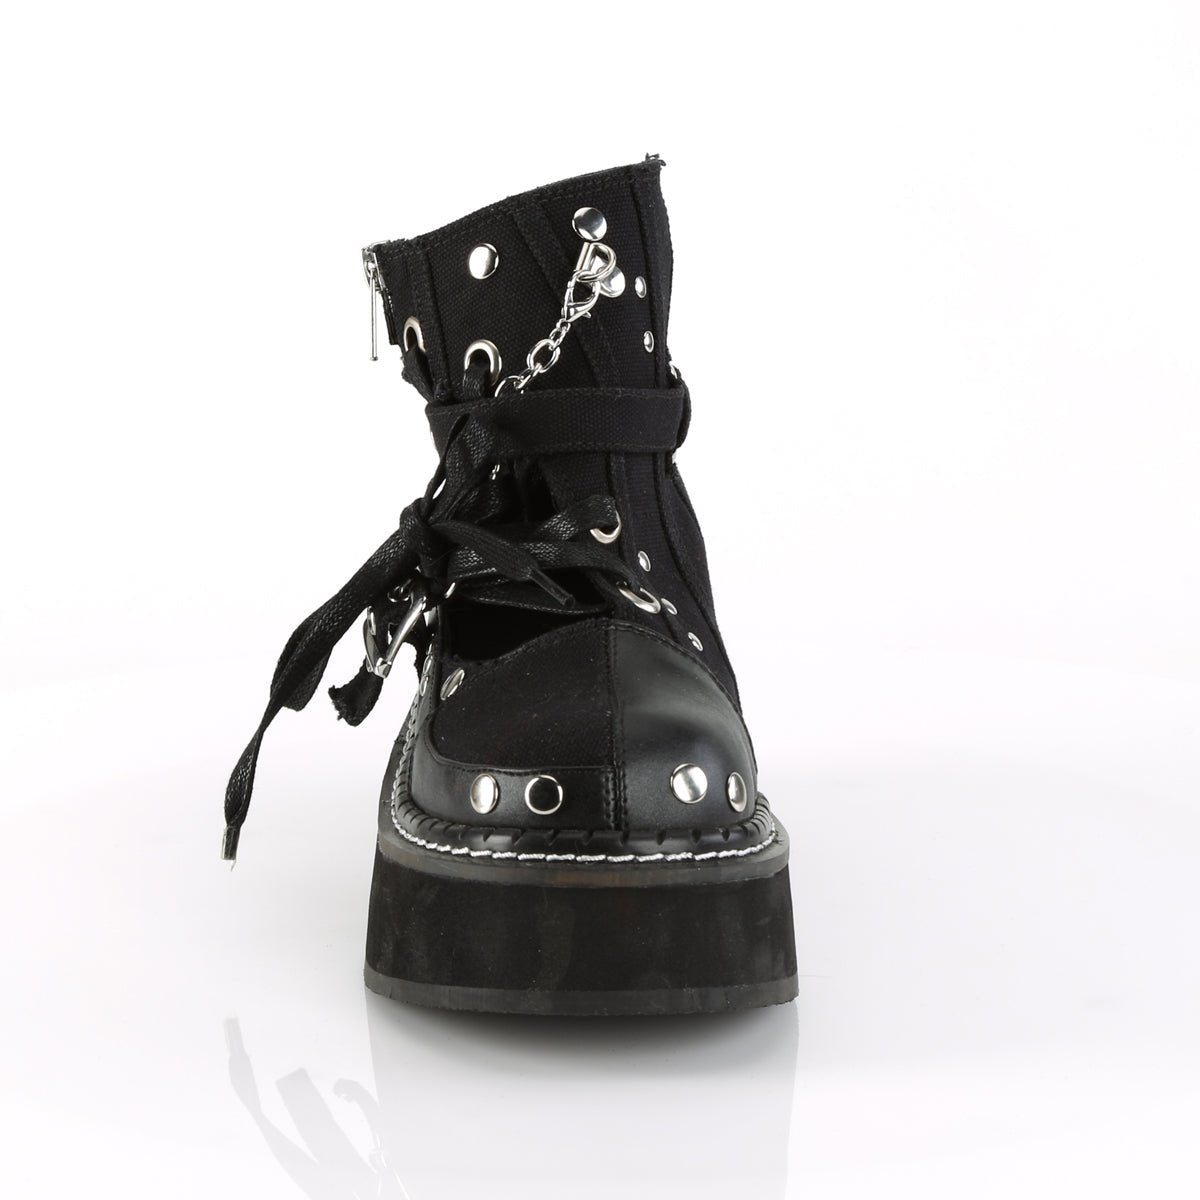 Too Fast | Demonia Emily 317 | Black Canvas & Vegan Leather Women's Ankle Boots